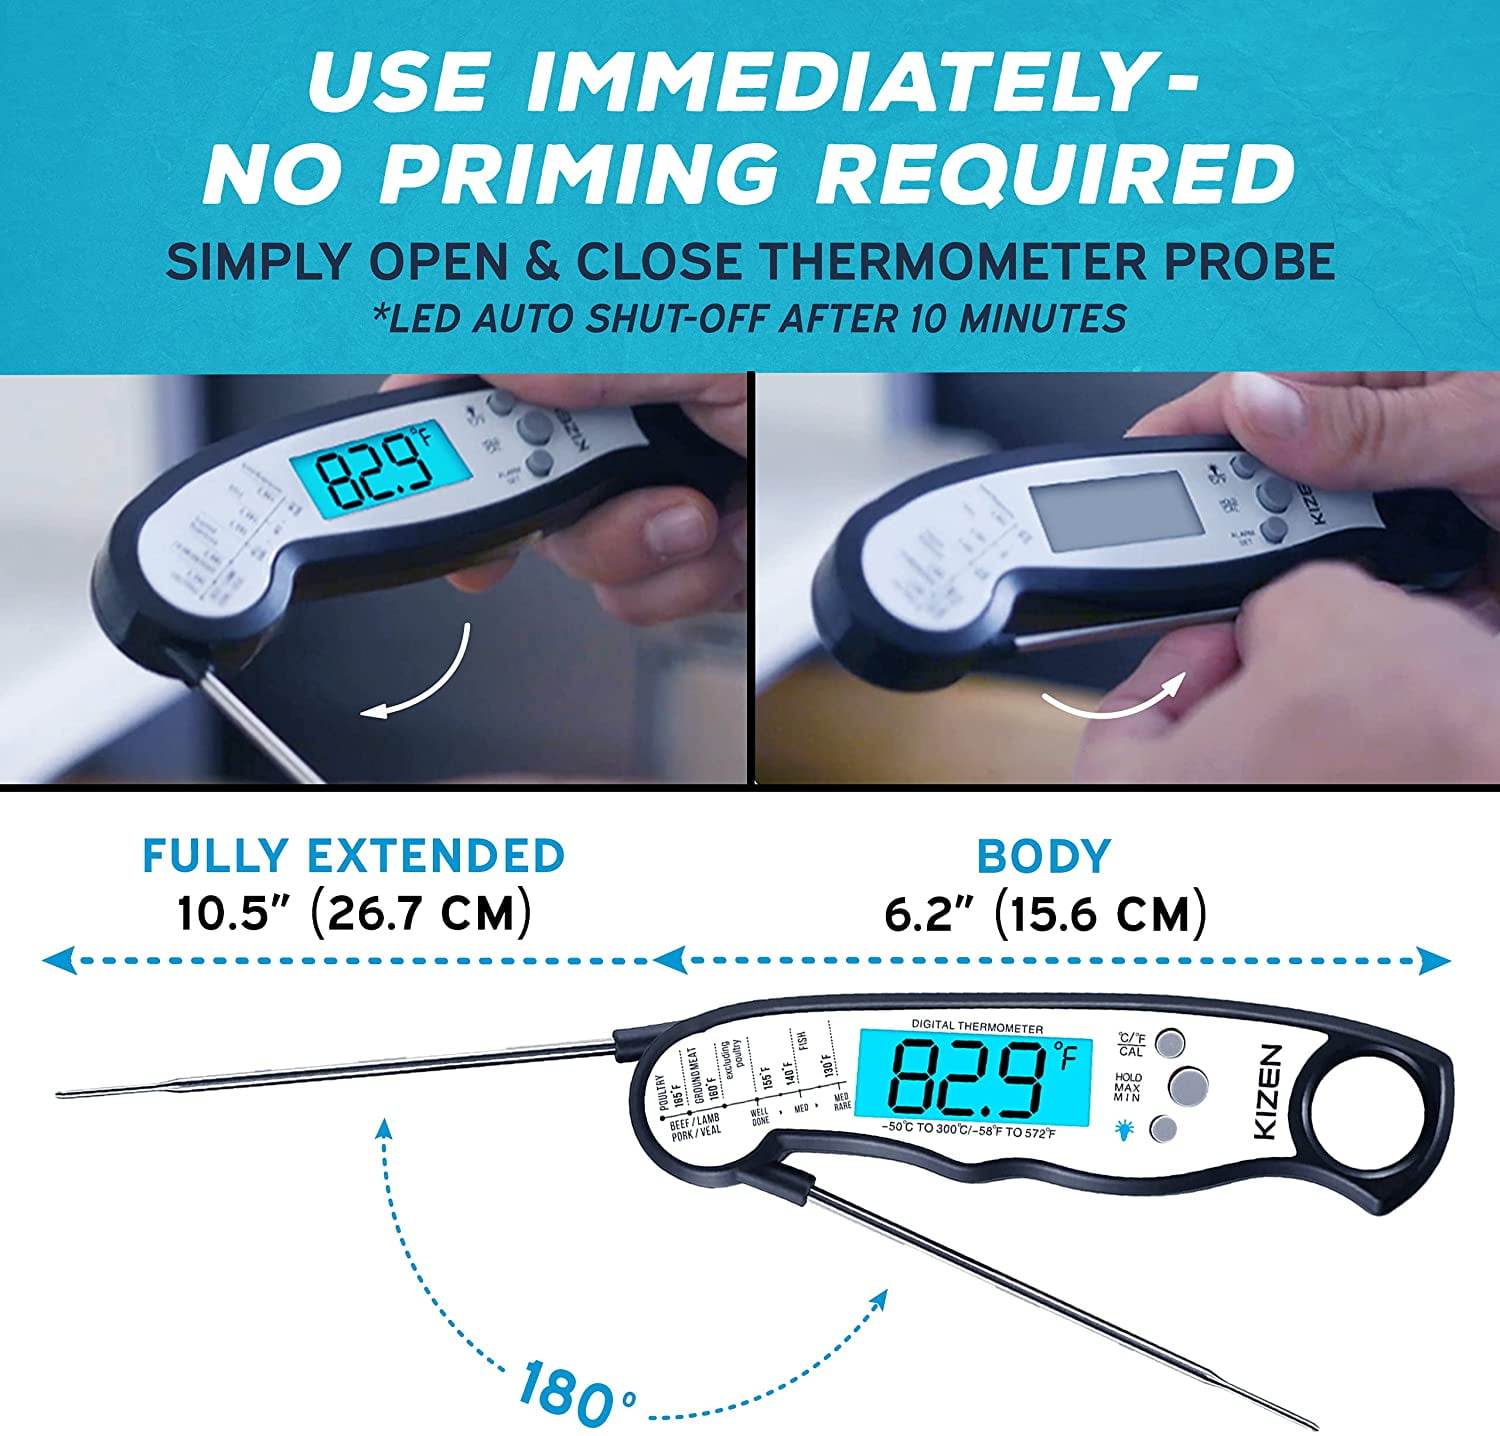 Kizen IP109 Waterproof Meat Thermometer with Long Probe - New